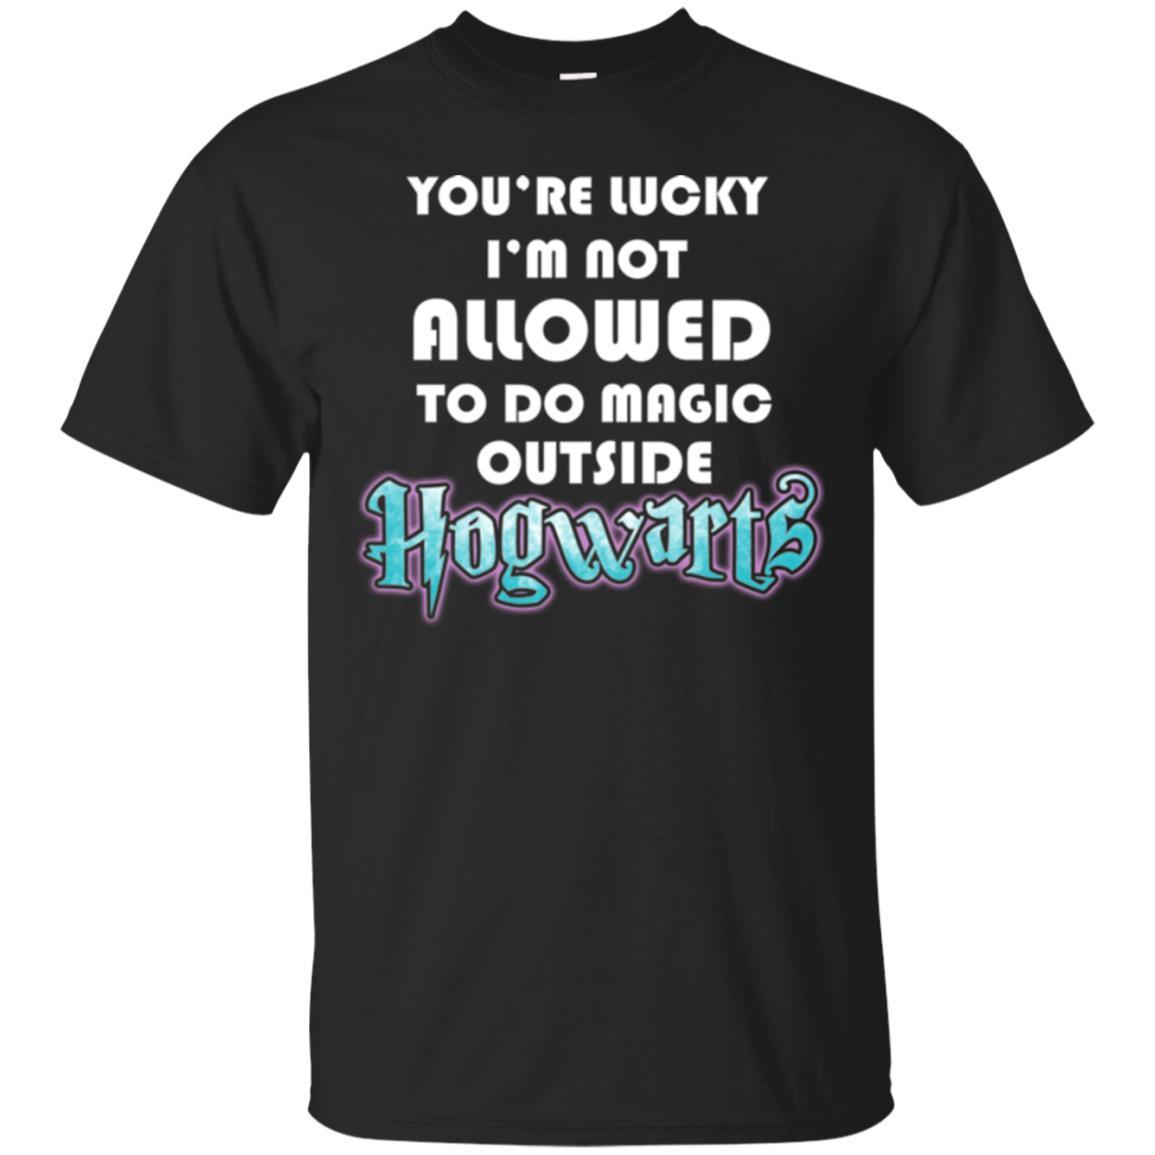 You_re Lucky I_m Not Allowed To Do Magic Outside Hogwarts Harry Potter Fan T-shirt Black S 